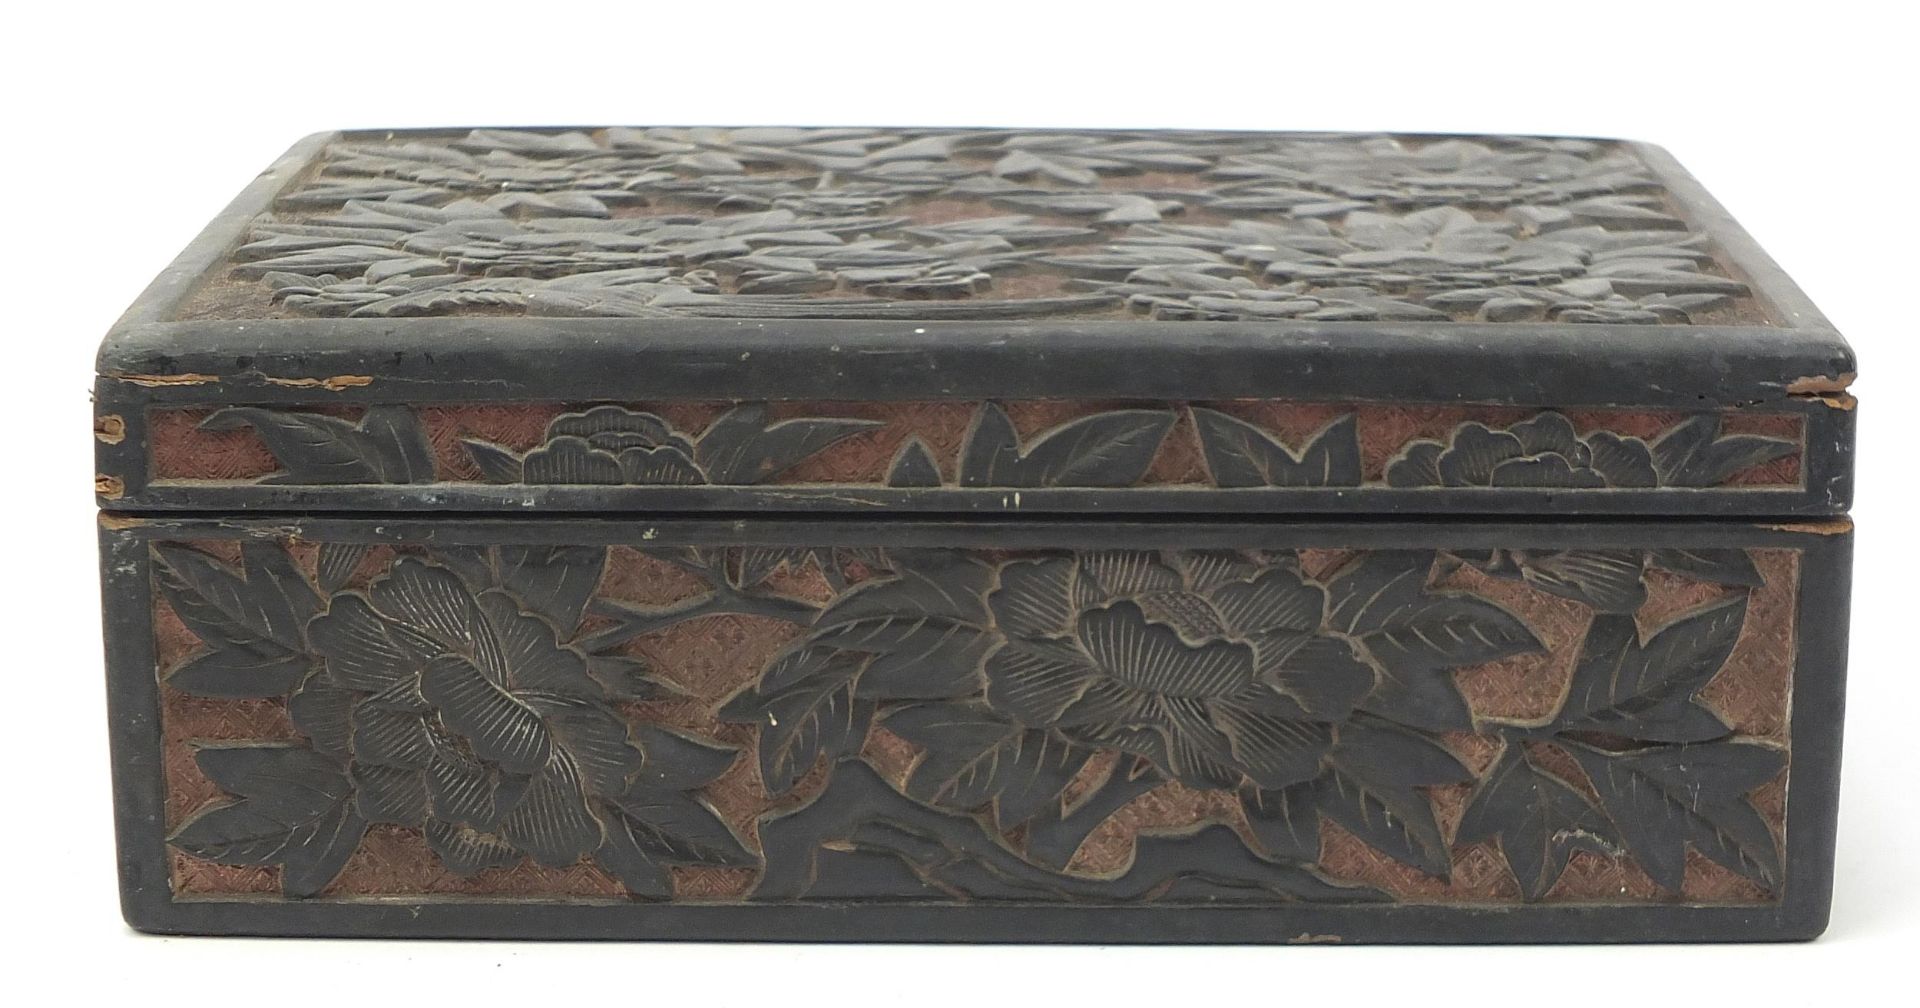 Chinese cinnabar lacquer box and cover carved with birds amongst flowers, 10.5cm H x 29cm W x 21.5cm - Image 5 of 8